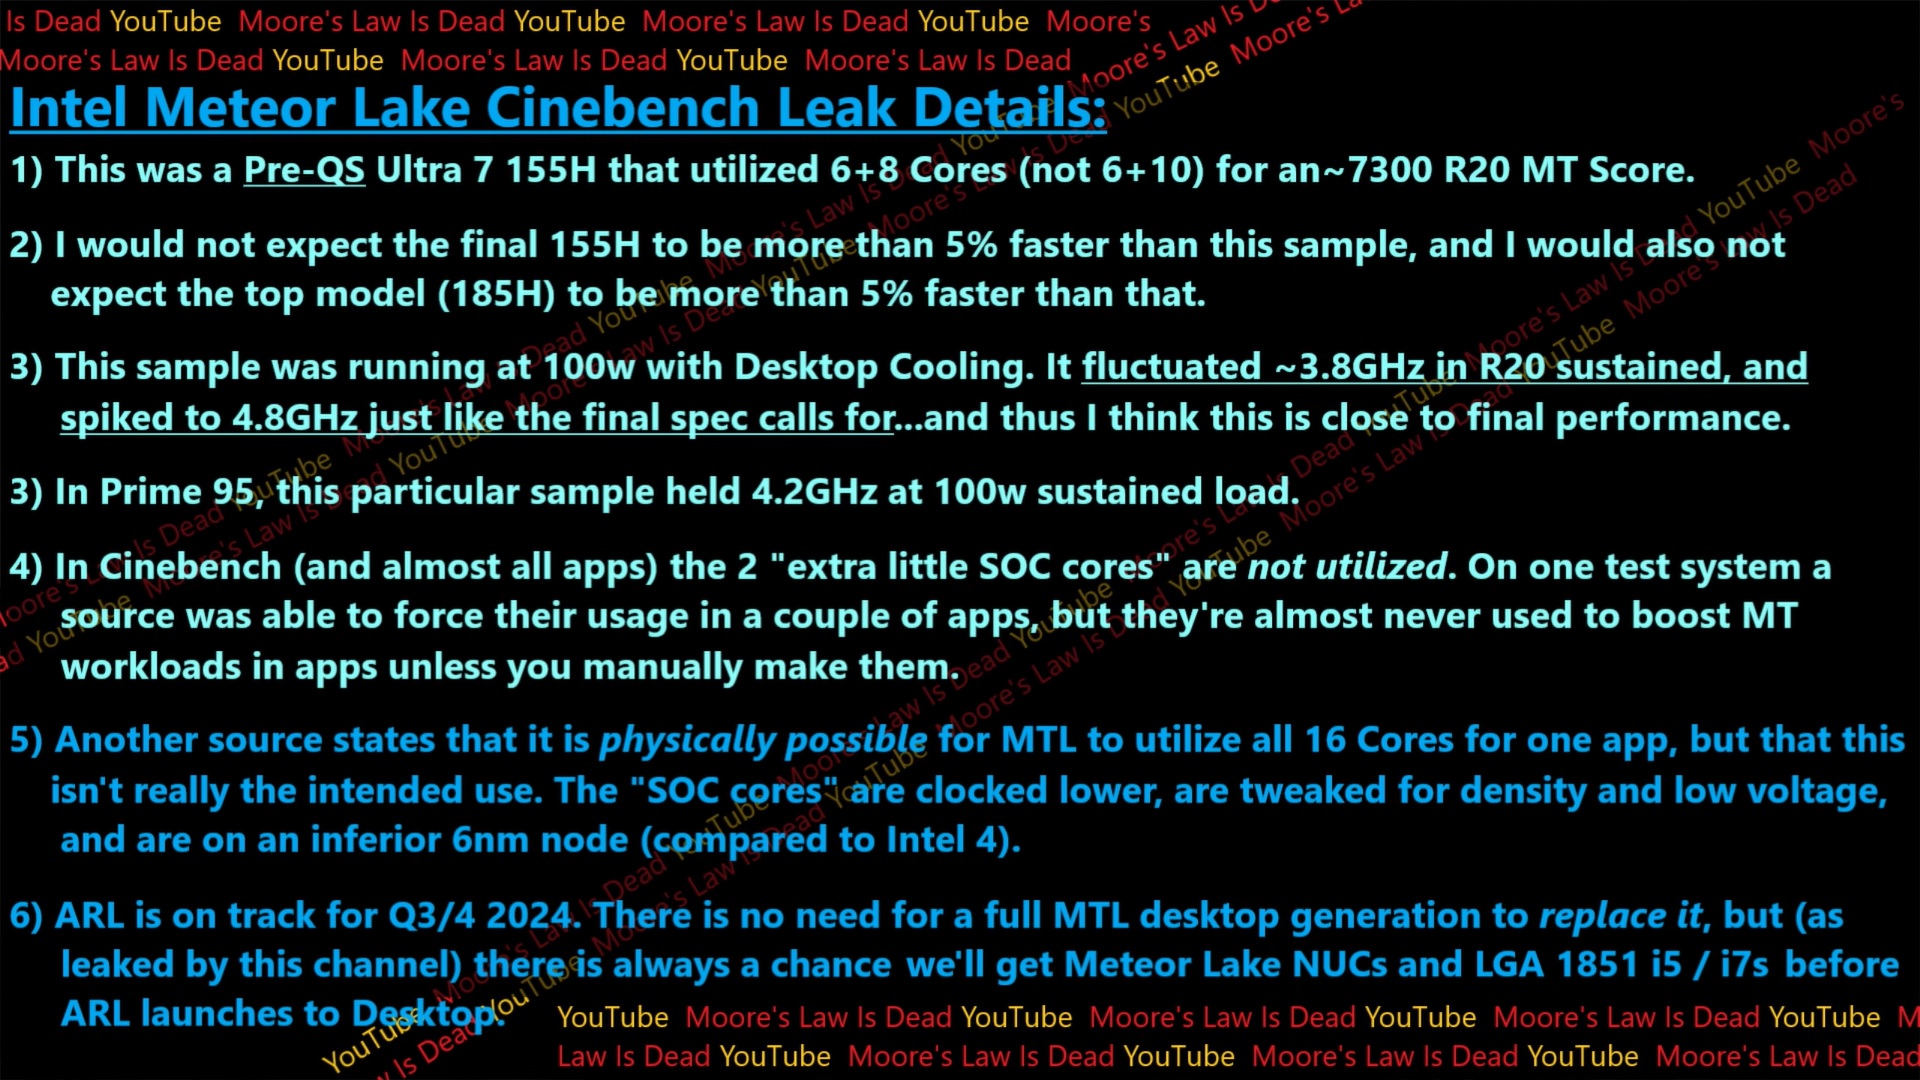 Intel Meteor Lake Core Ultra 7 155H performance falls in line with  current-gen Raptor Lake mobile chips in leaked Cinebench R20 result -   News